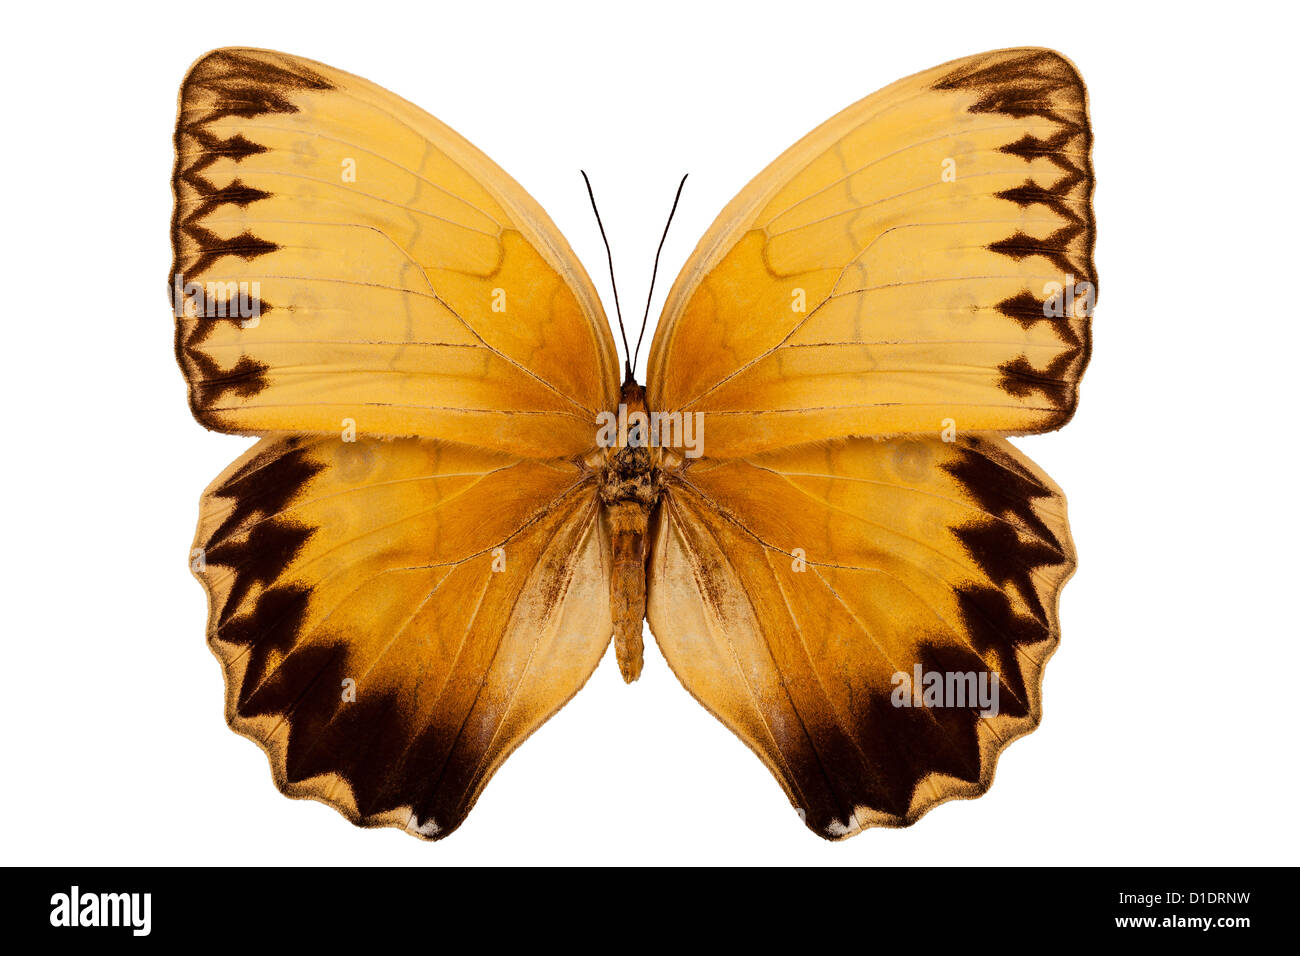 Butterfly species stichophthalma howqua suffusa 'Jungle Queen Butterfly' Stock Photo